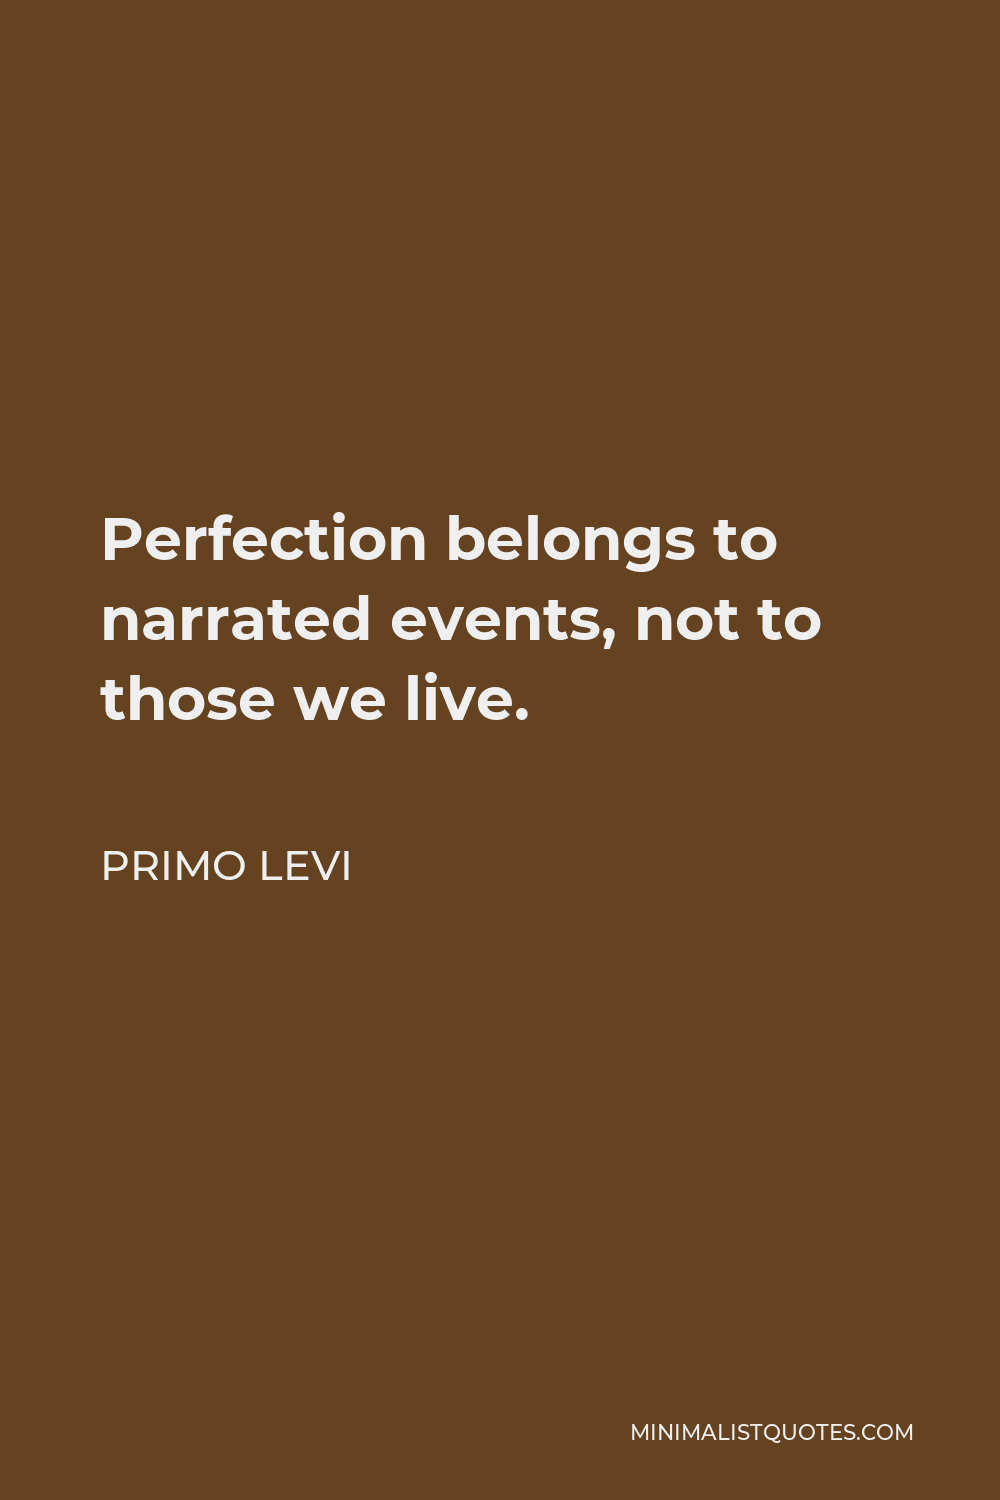 Primo Levi Quote - Perfection belongs to narrated events, not to those we live.